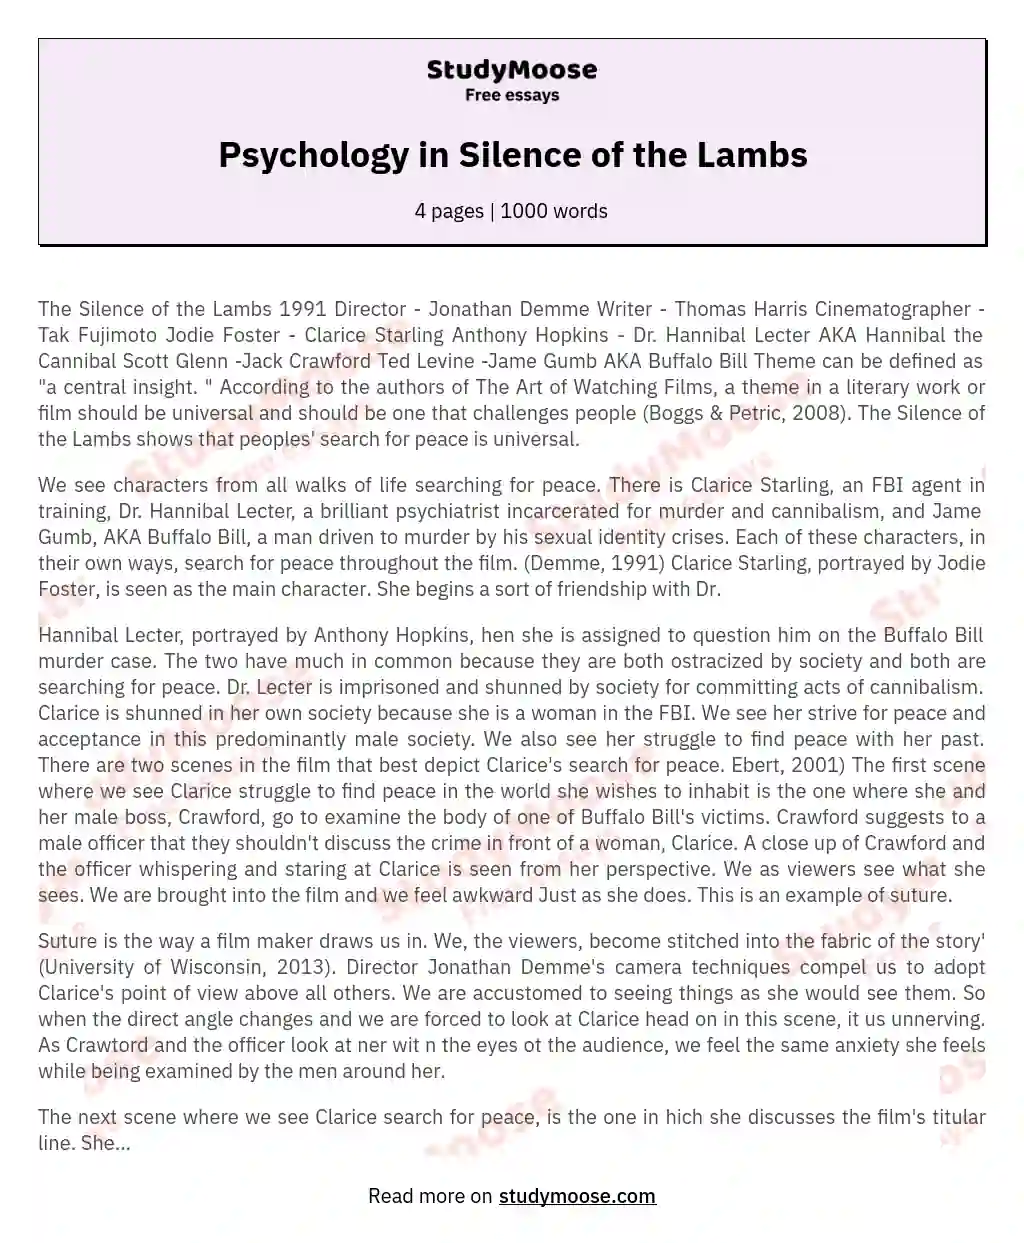 Psychology in Silence of the Lambs